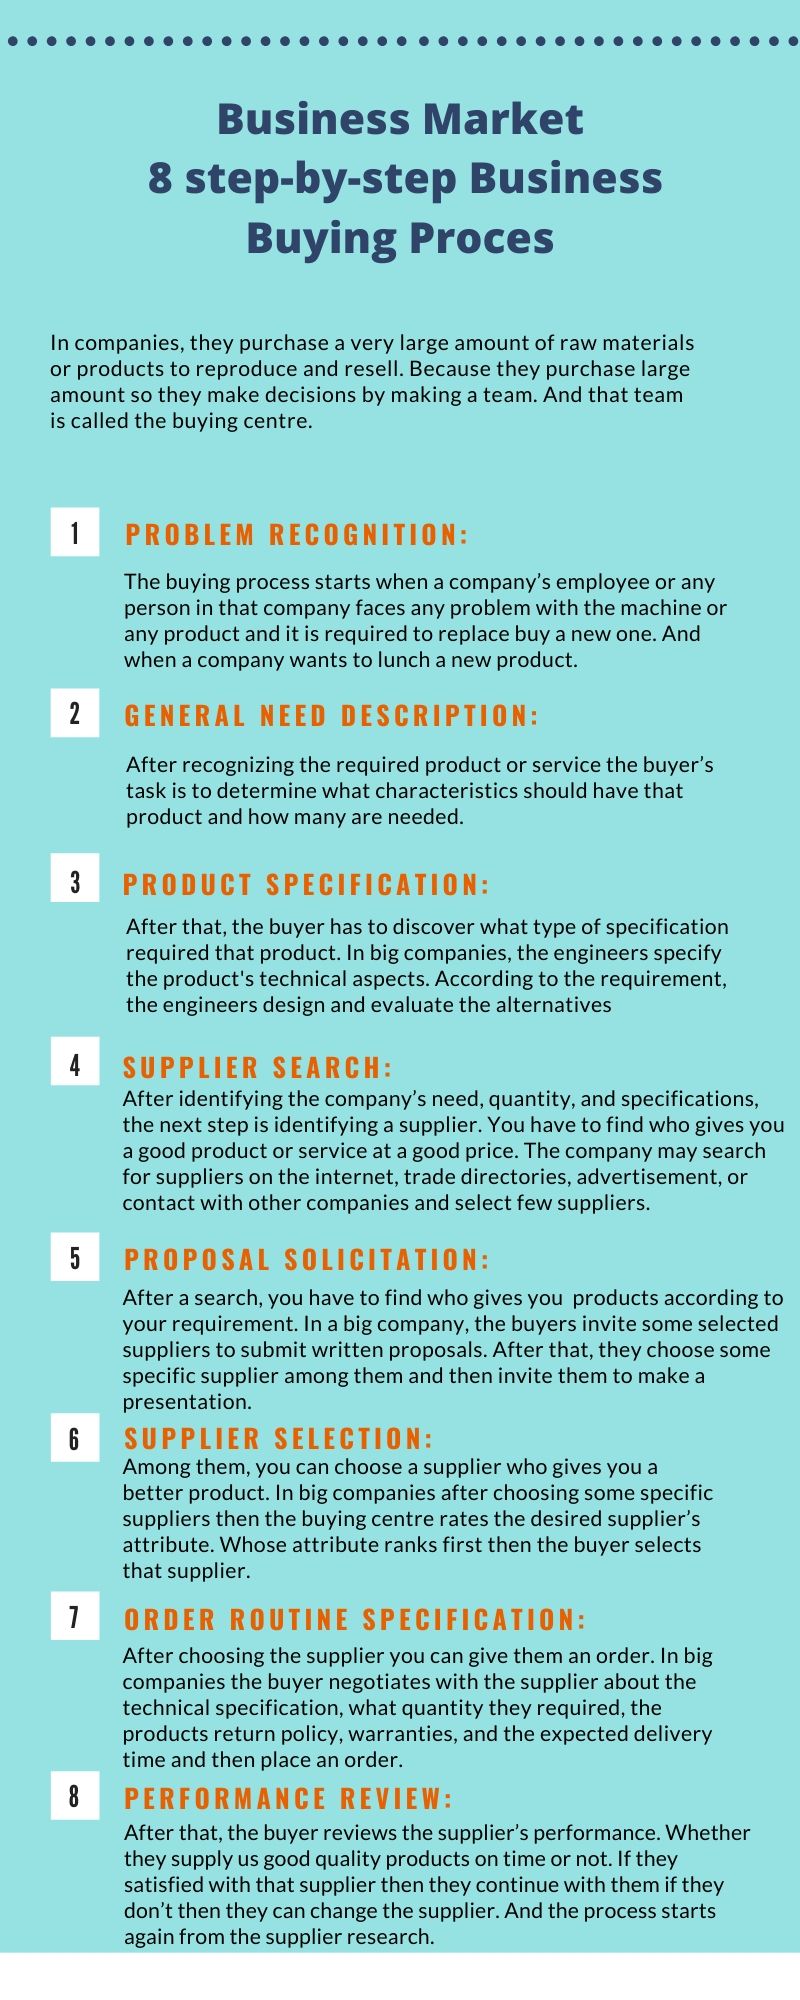 Infographic of business buying process.